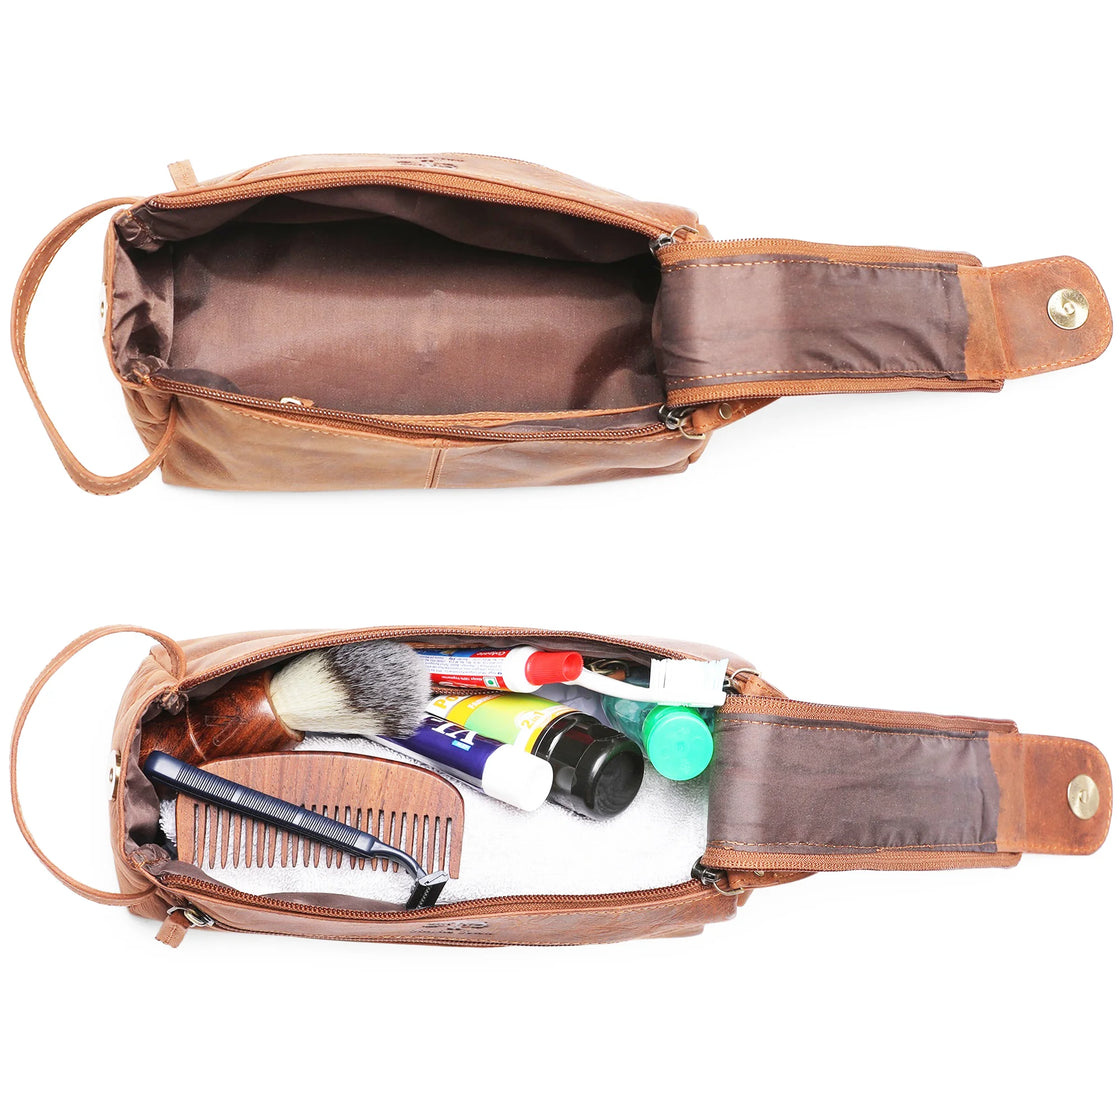  10 Premium Leather Toiletry Travel Pouch With Waterproof  Lining  King-Size Handcrafted Vintage Dopp - Kit ~ Gift for Father's Day  By Aaron Leather Goods (Copper) : Beauty & Personal Care